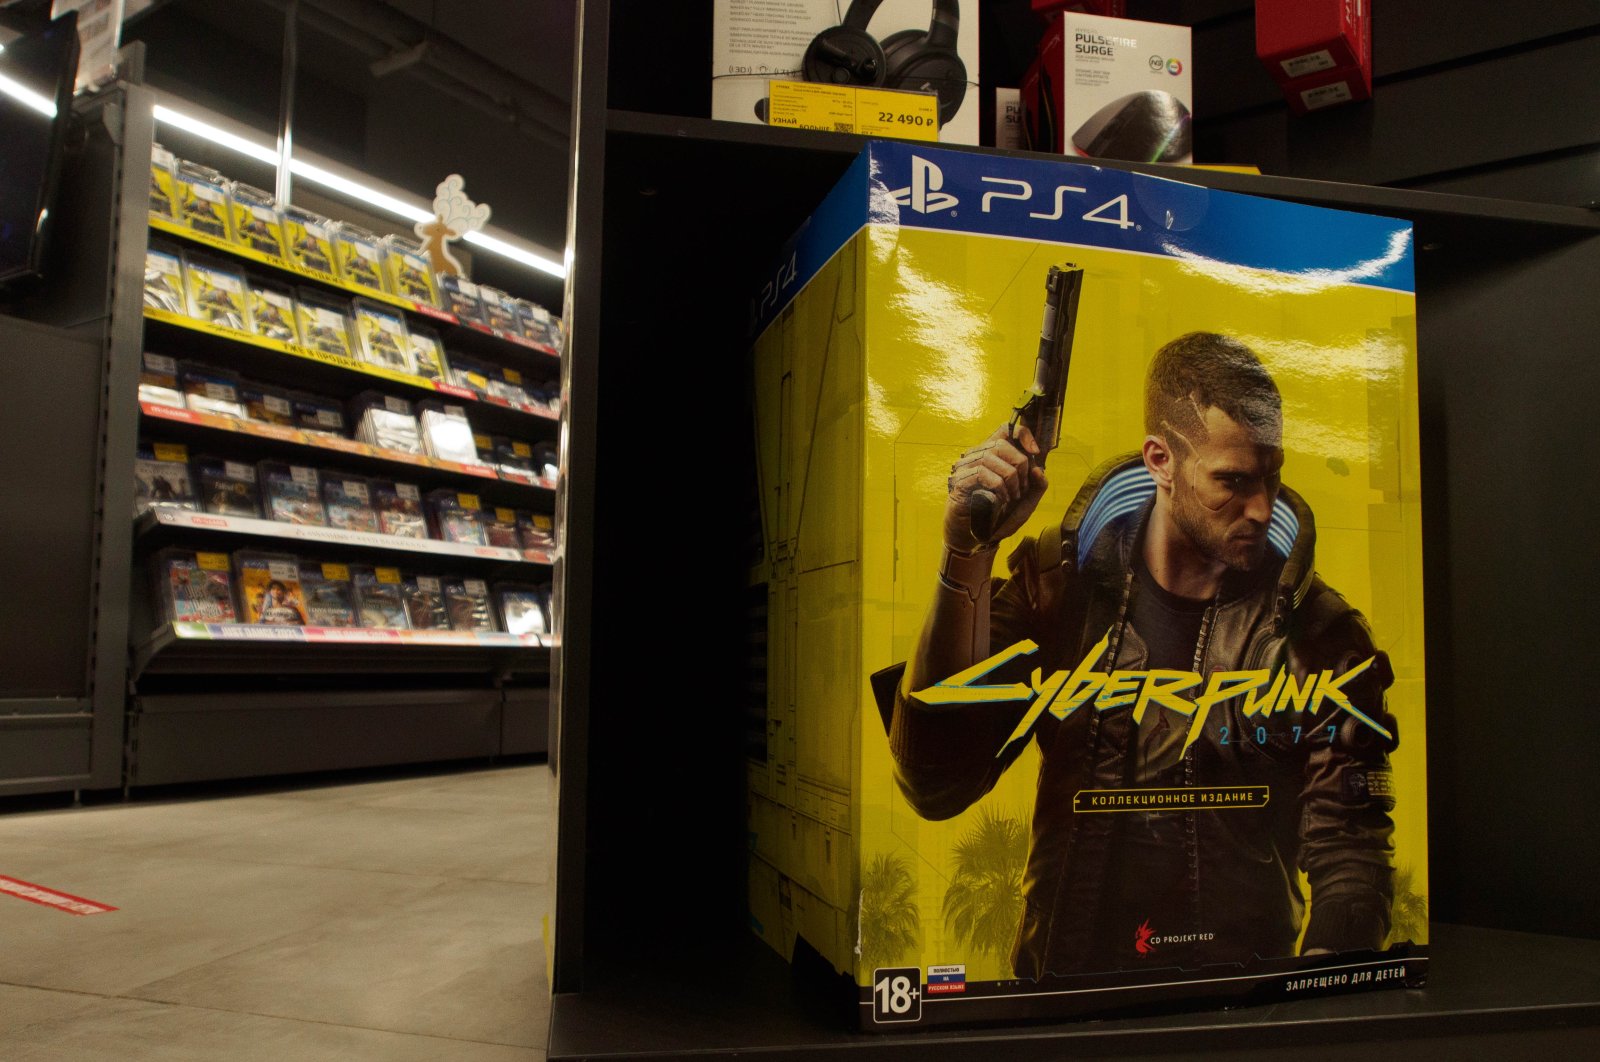 A box with the Sony PlayStation 4 Cyberpunk 2077 Collector's Edition is seen displayed at a store in Russia. (Reuters Photo)